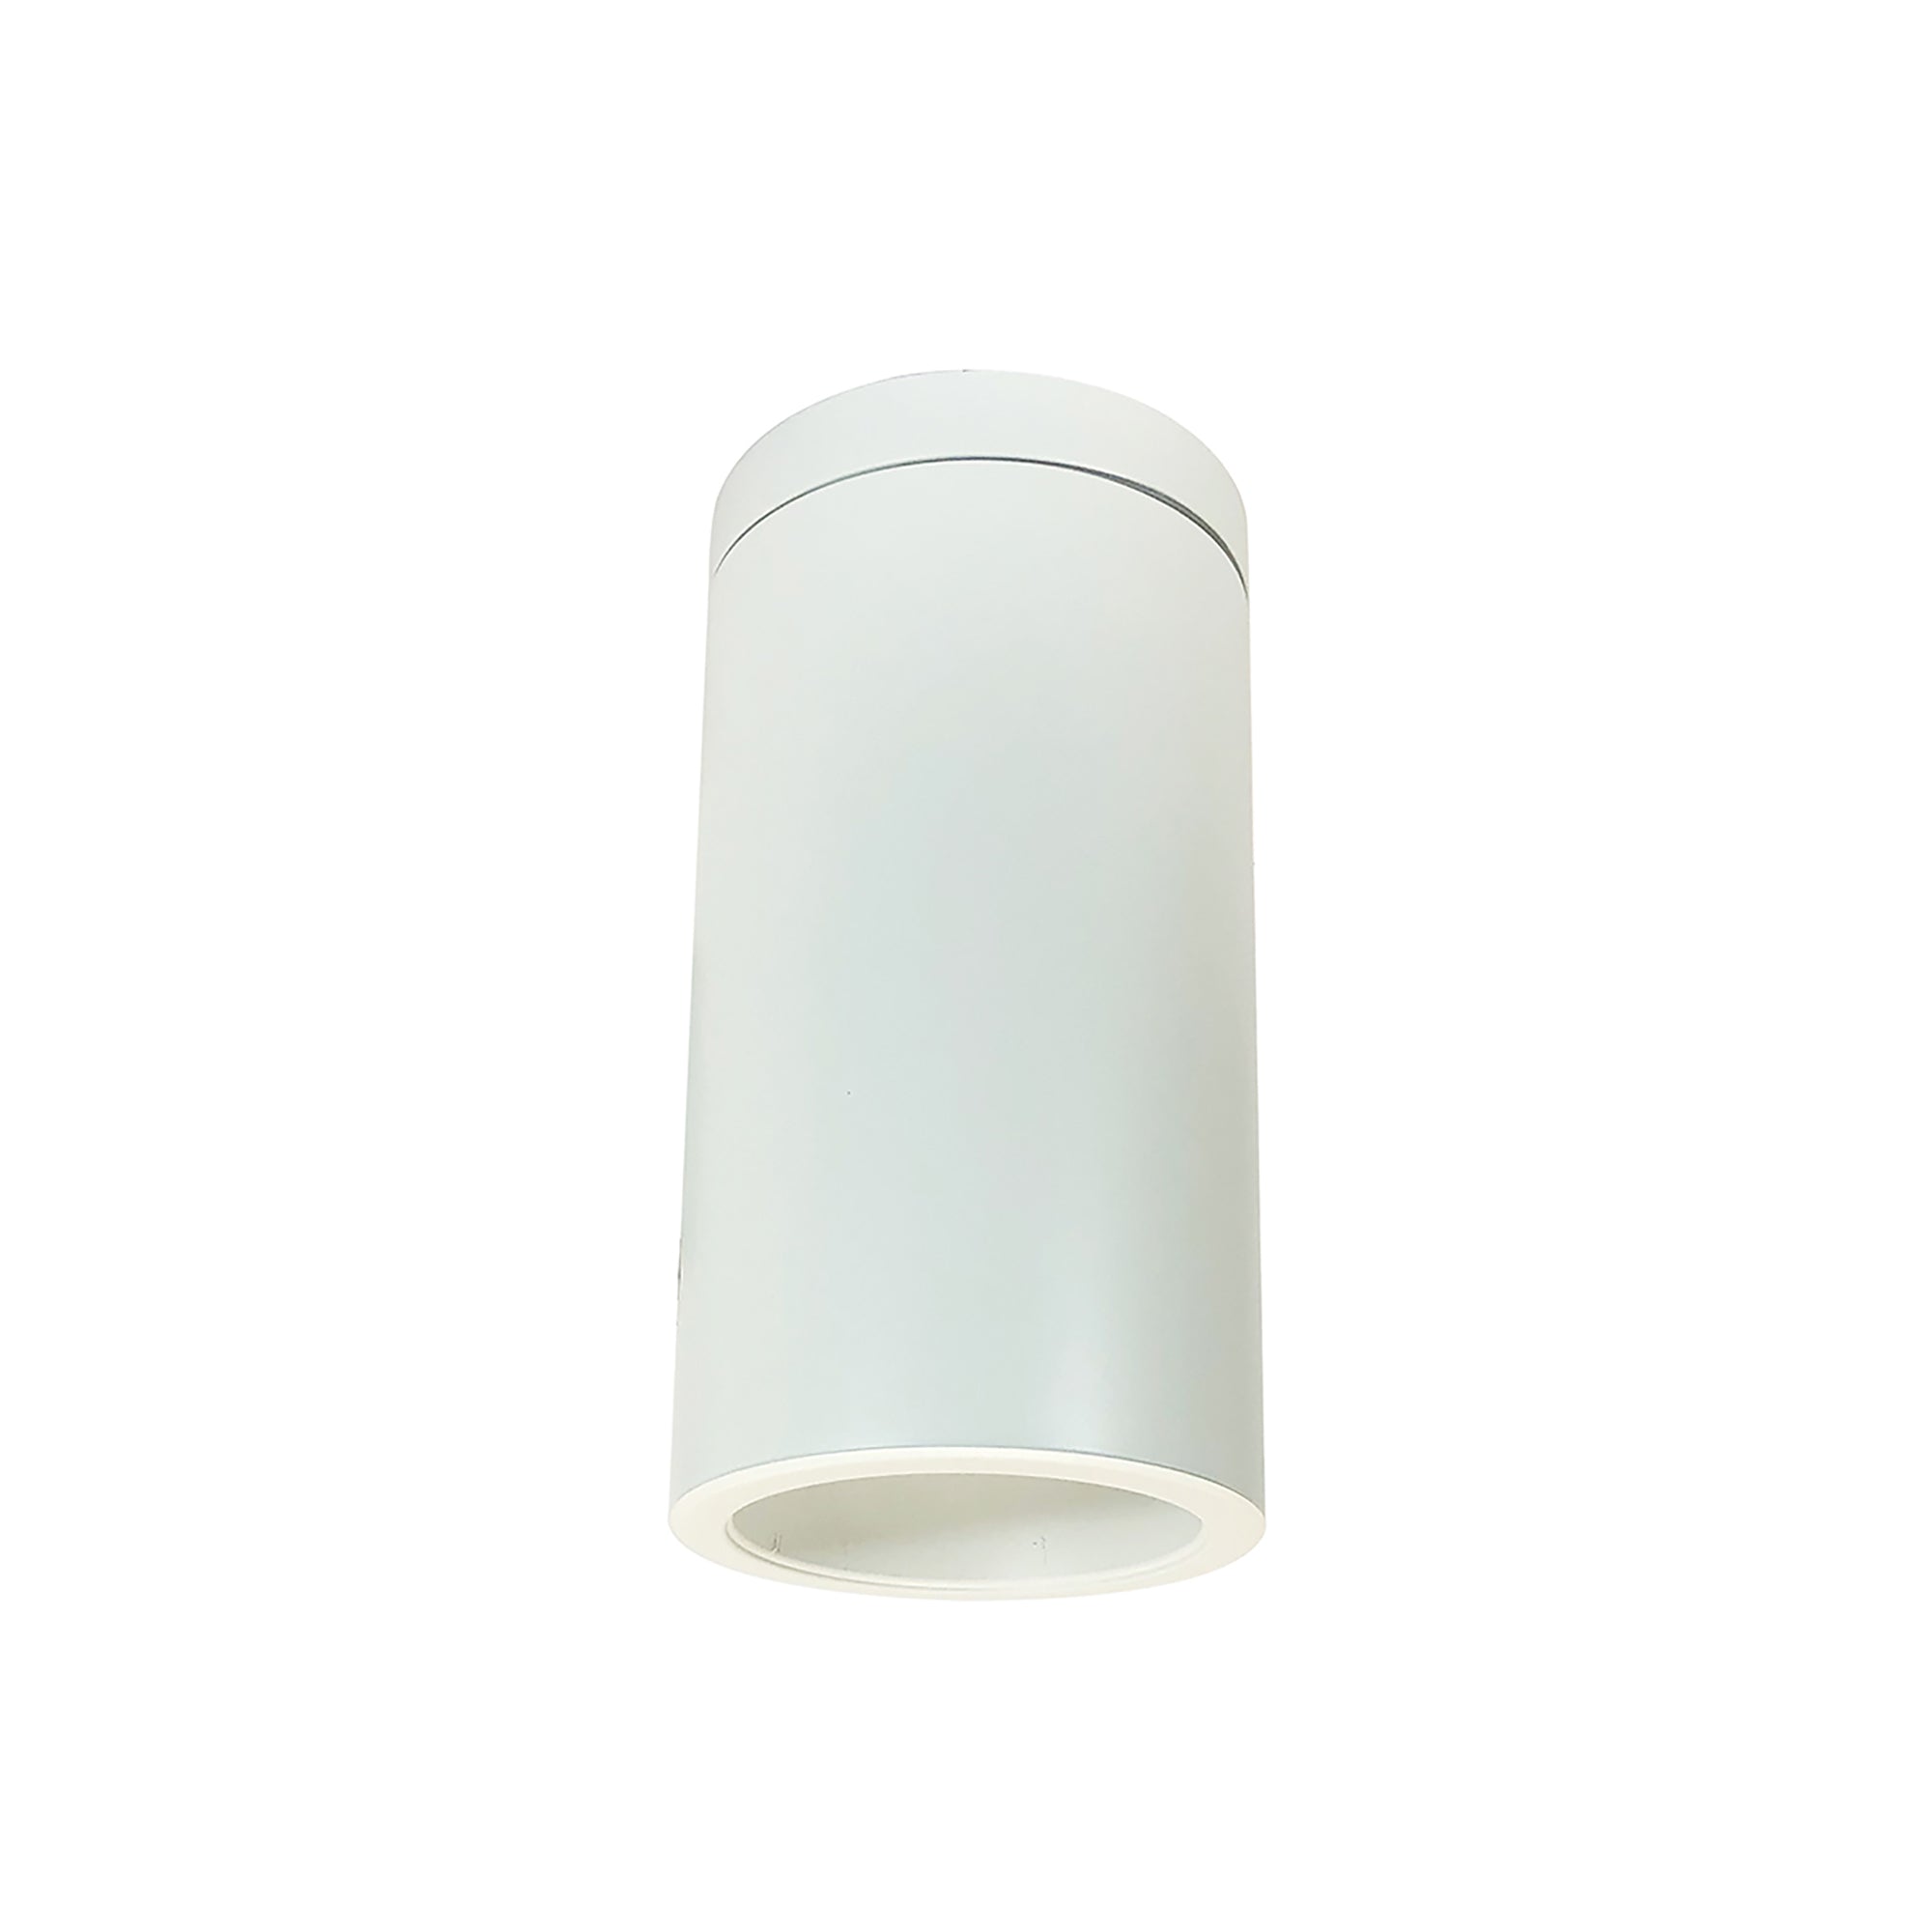 Nora Lighting NYLS2-6S15130FWWW6 - Cylinder - 6 Inch CYL SURFACE 1500LM REF FLD 30K WHT/WHT WHT CYL 120-277 0-10V